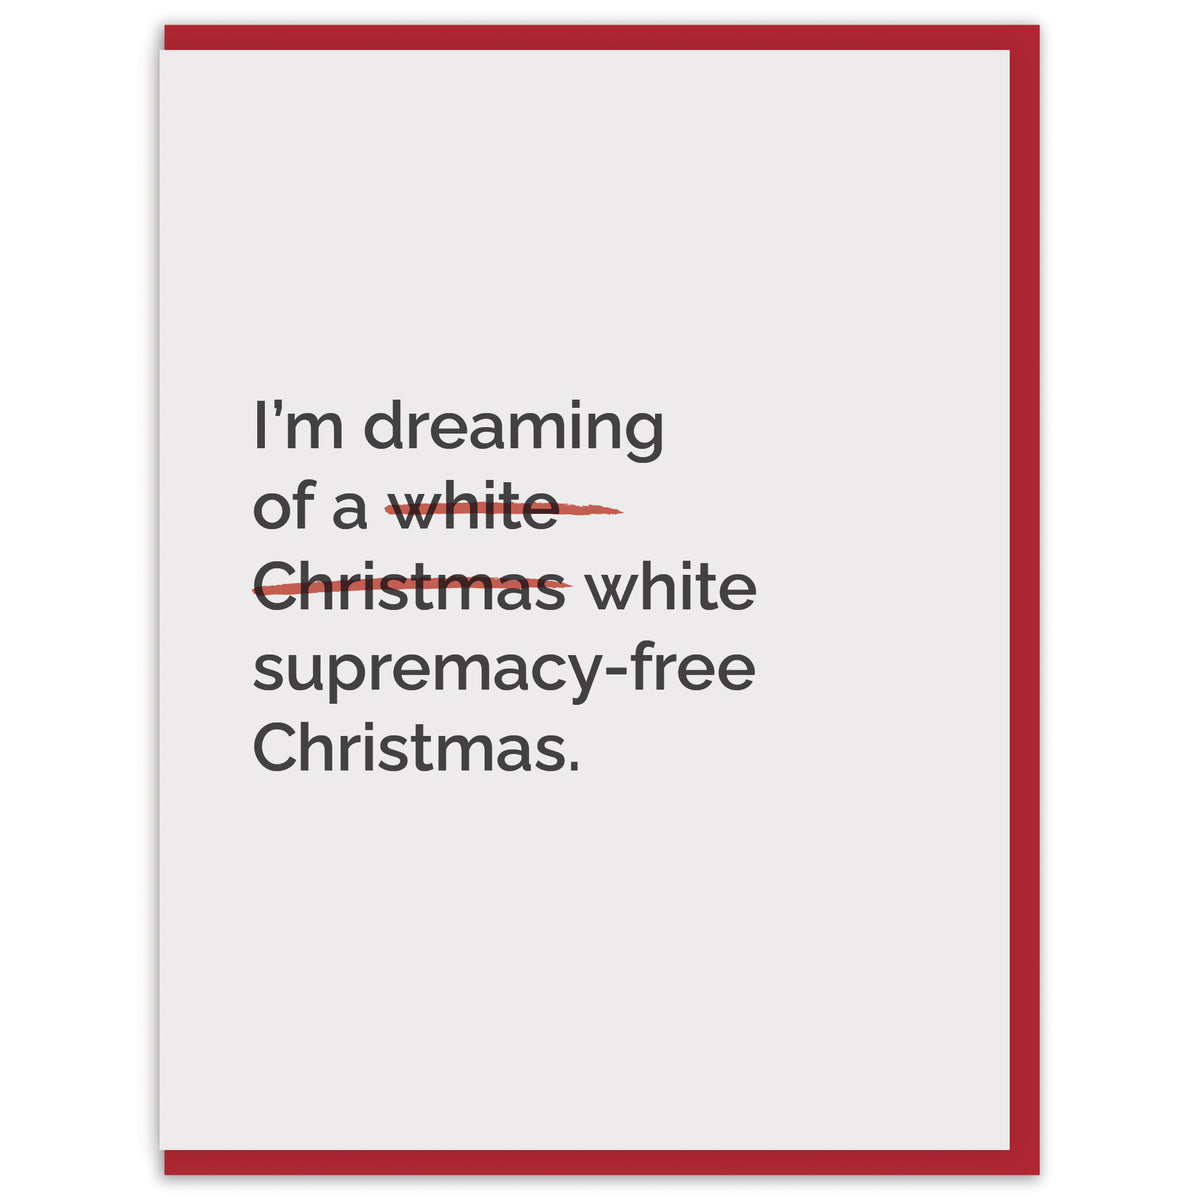 I’m dreaming of a white supremacy-free Christmas.